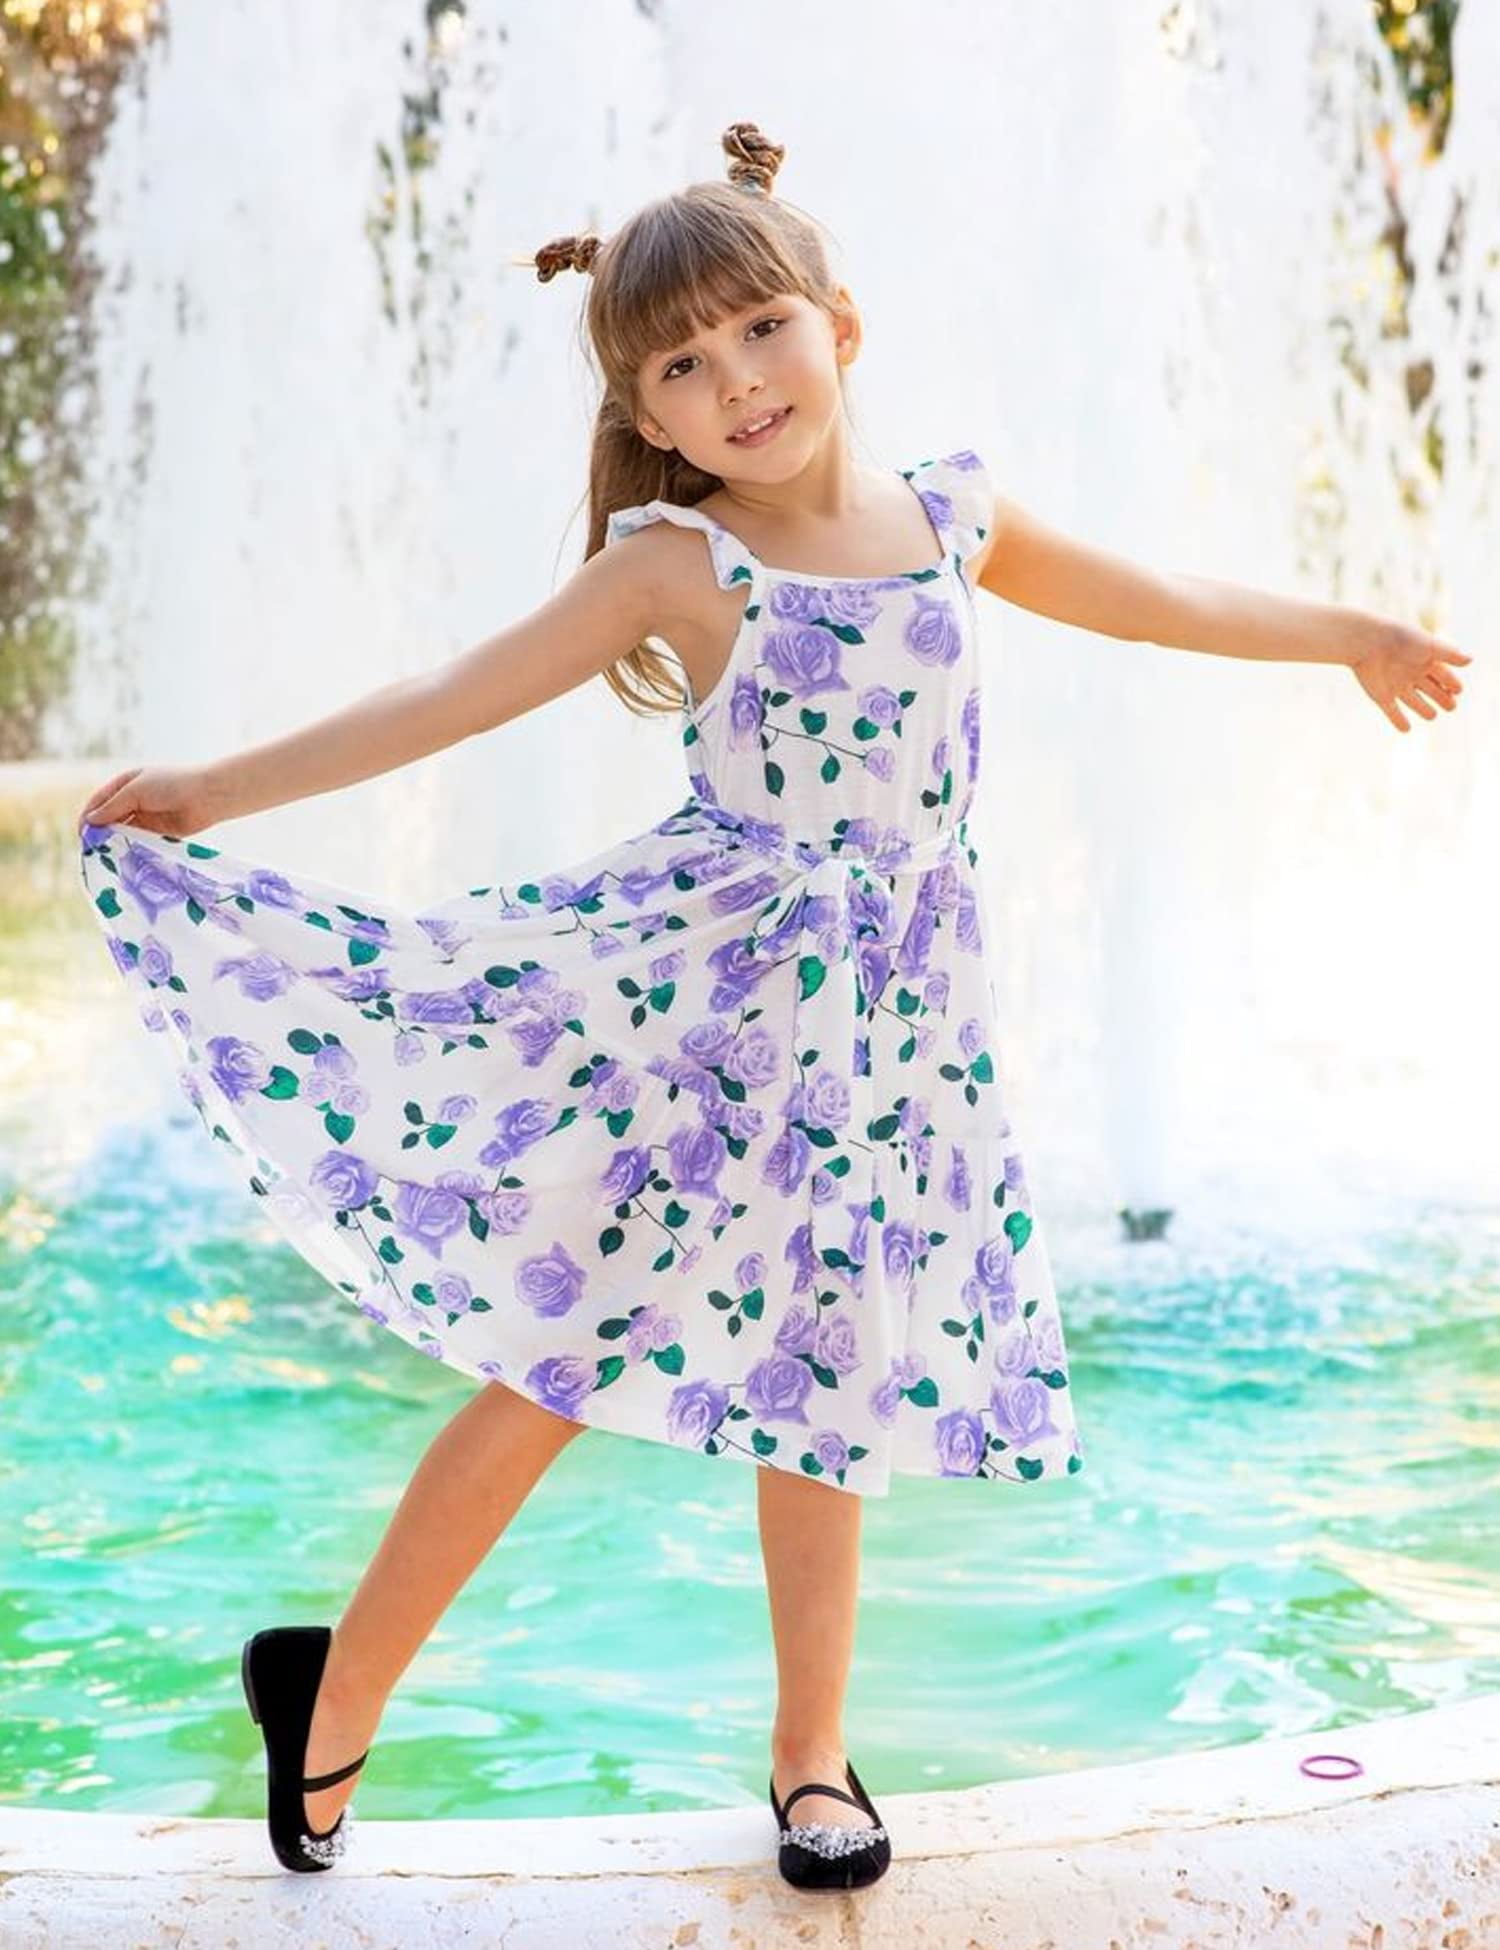  Arshiner Girls Dress Summer Frocks Casual A-Line